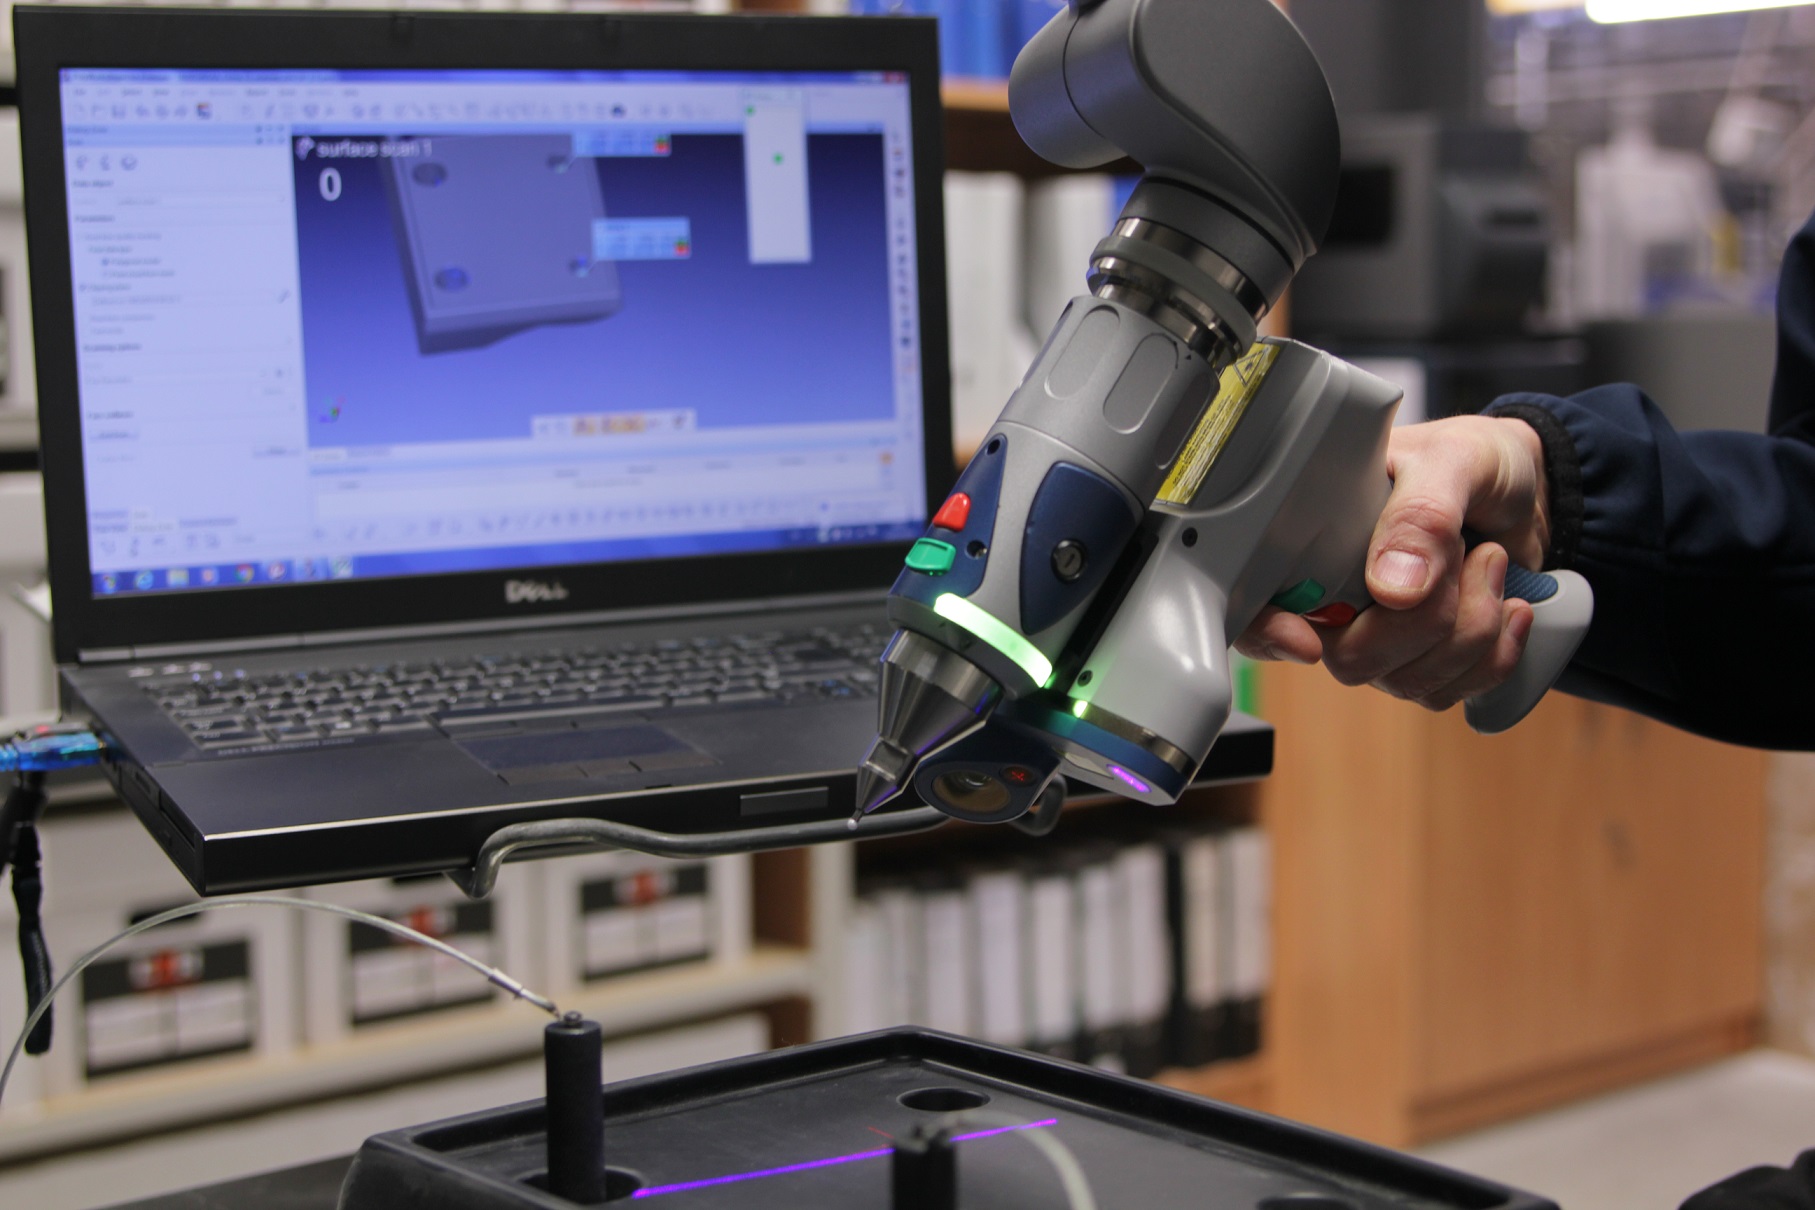 3D Scan arm being used to measure a part